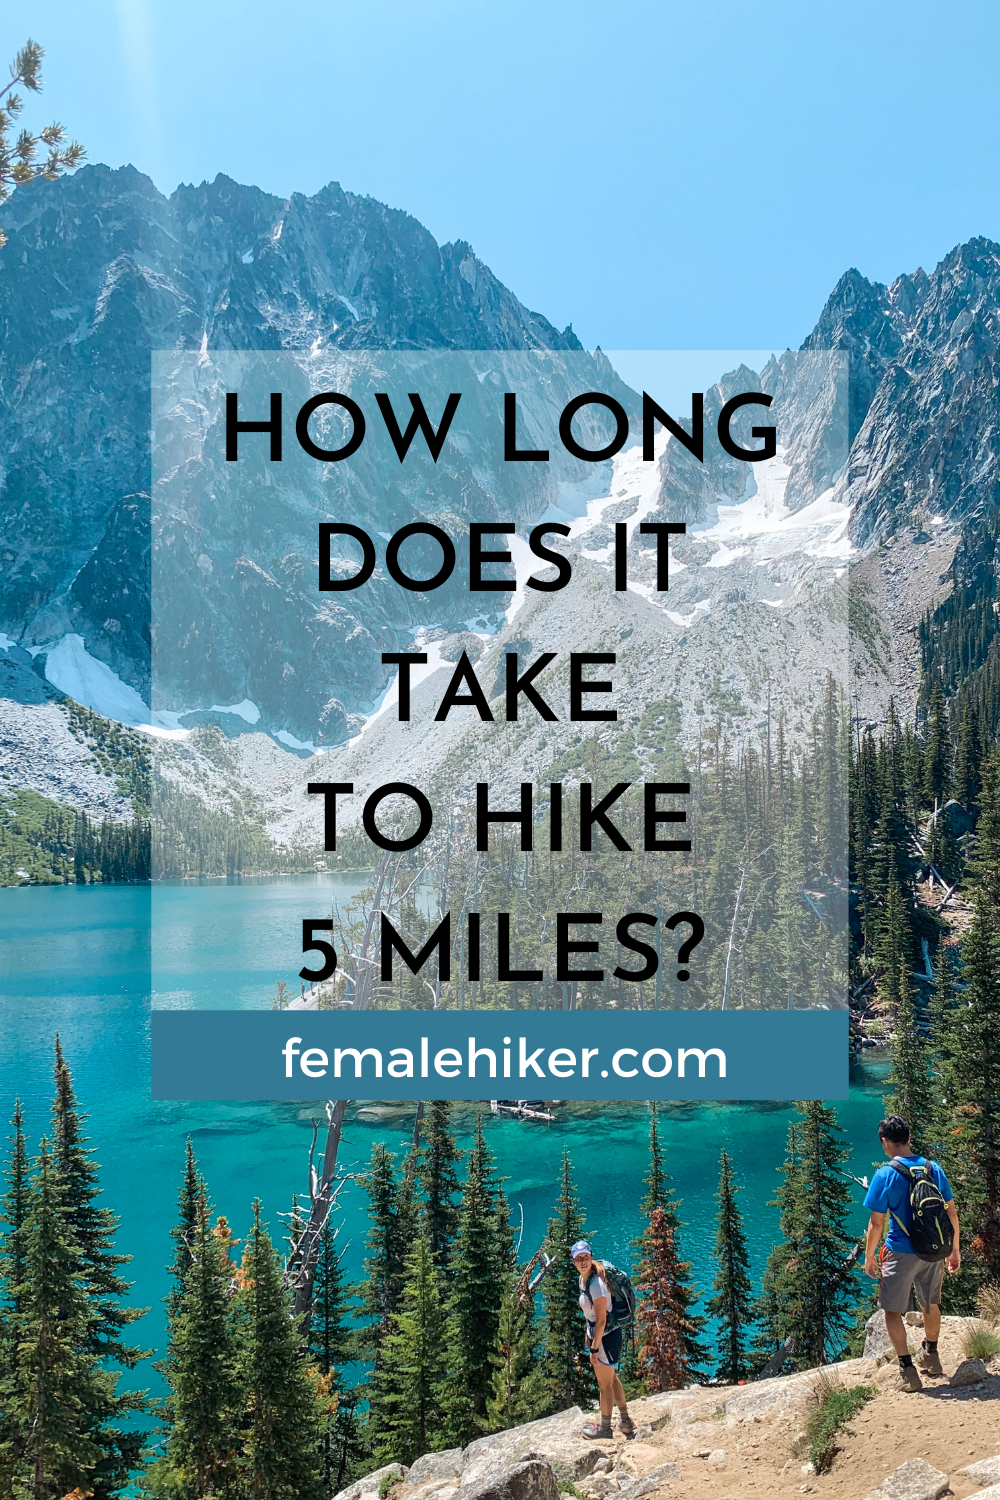 How Long Does it Take to Hike 5 Miles? 8